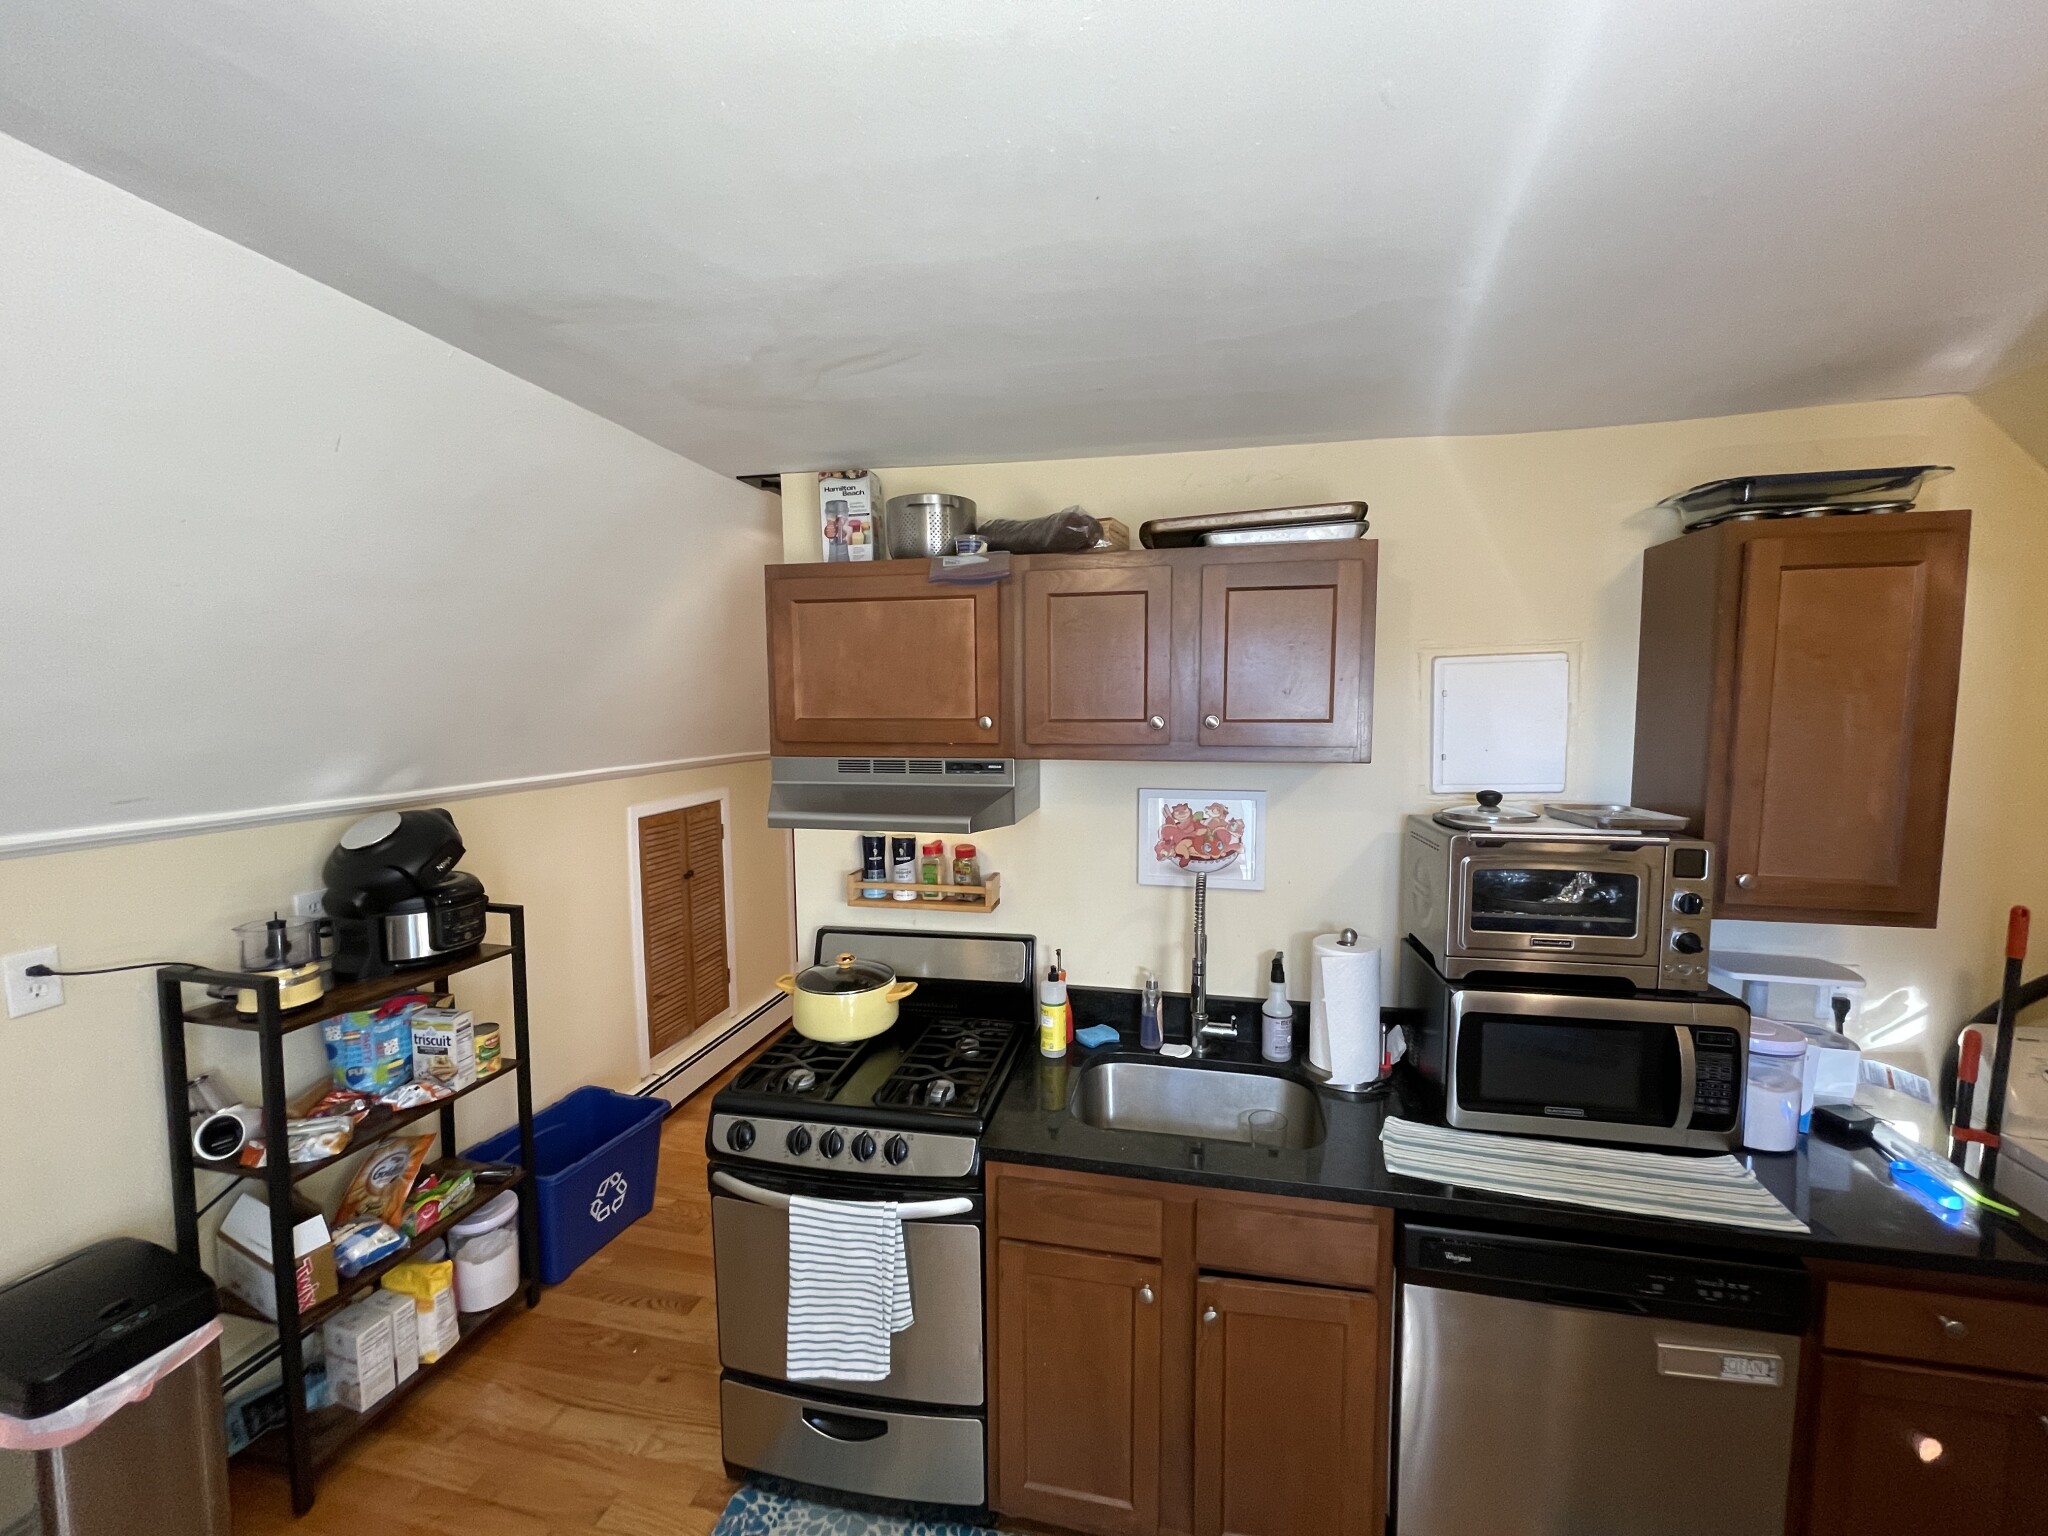 Photos of apartment on Irving St.,Somerville MA 02144